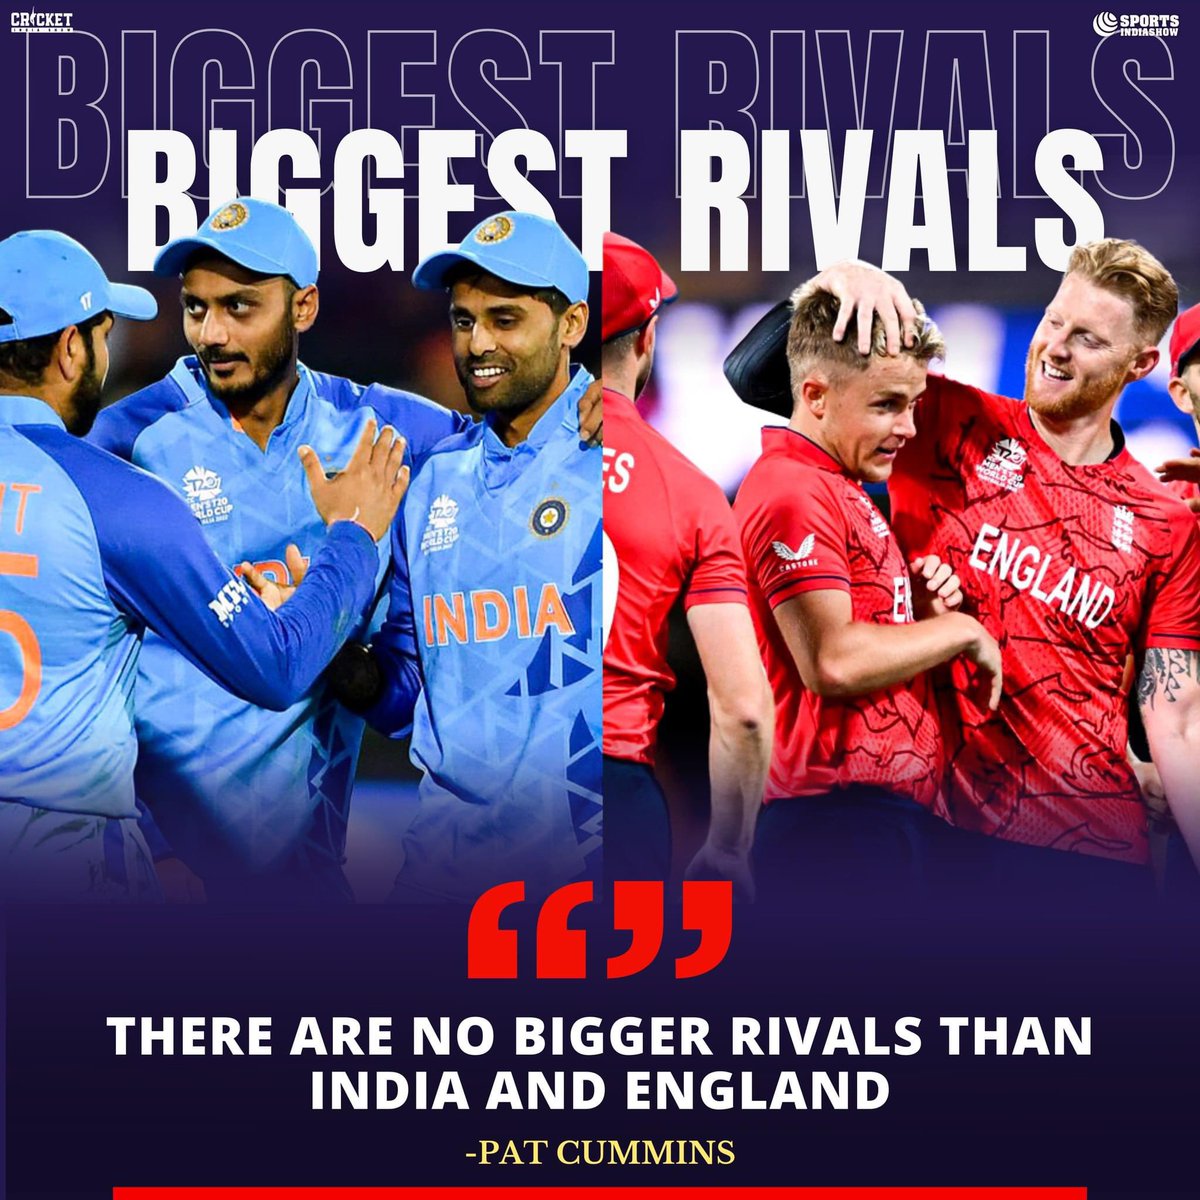 Pat Cummins pins India and England as ultimate rivals in cricket !

#PatCummins #Cricket #T20Cricket #INDvsENG #BCCI #ICC #T20WC